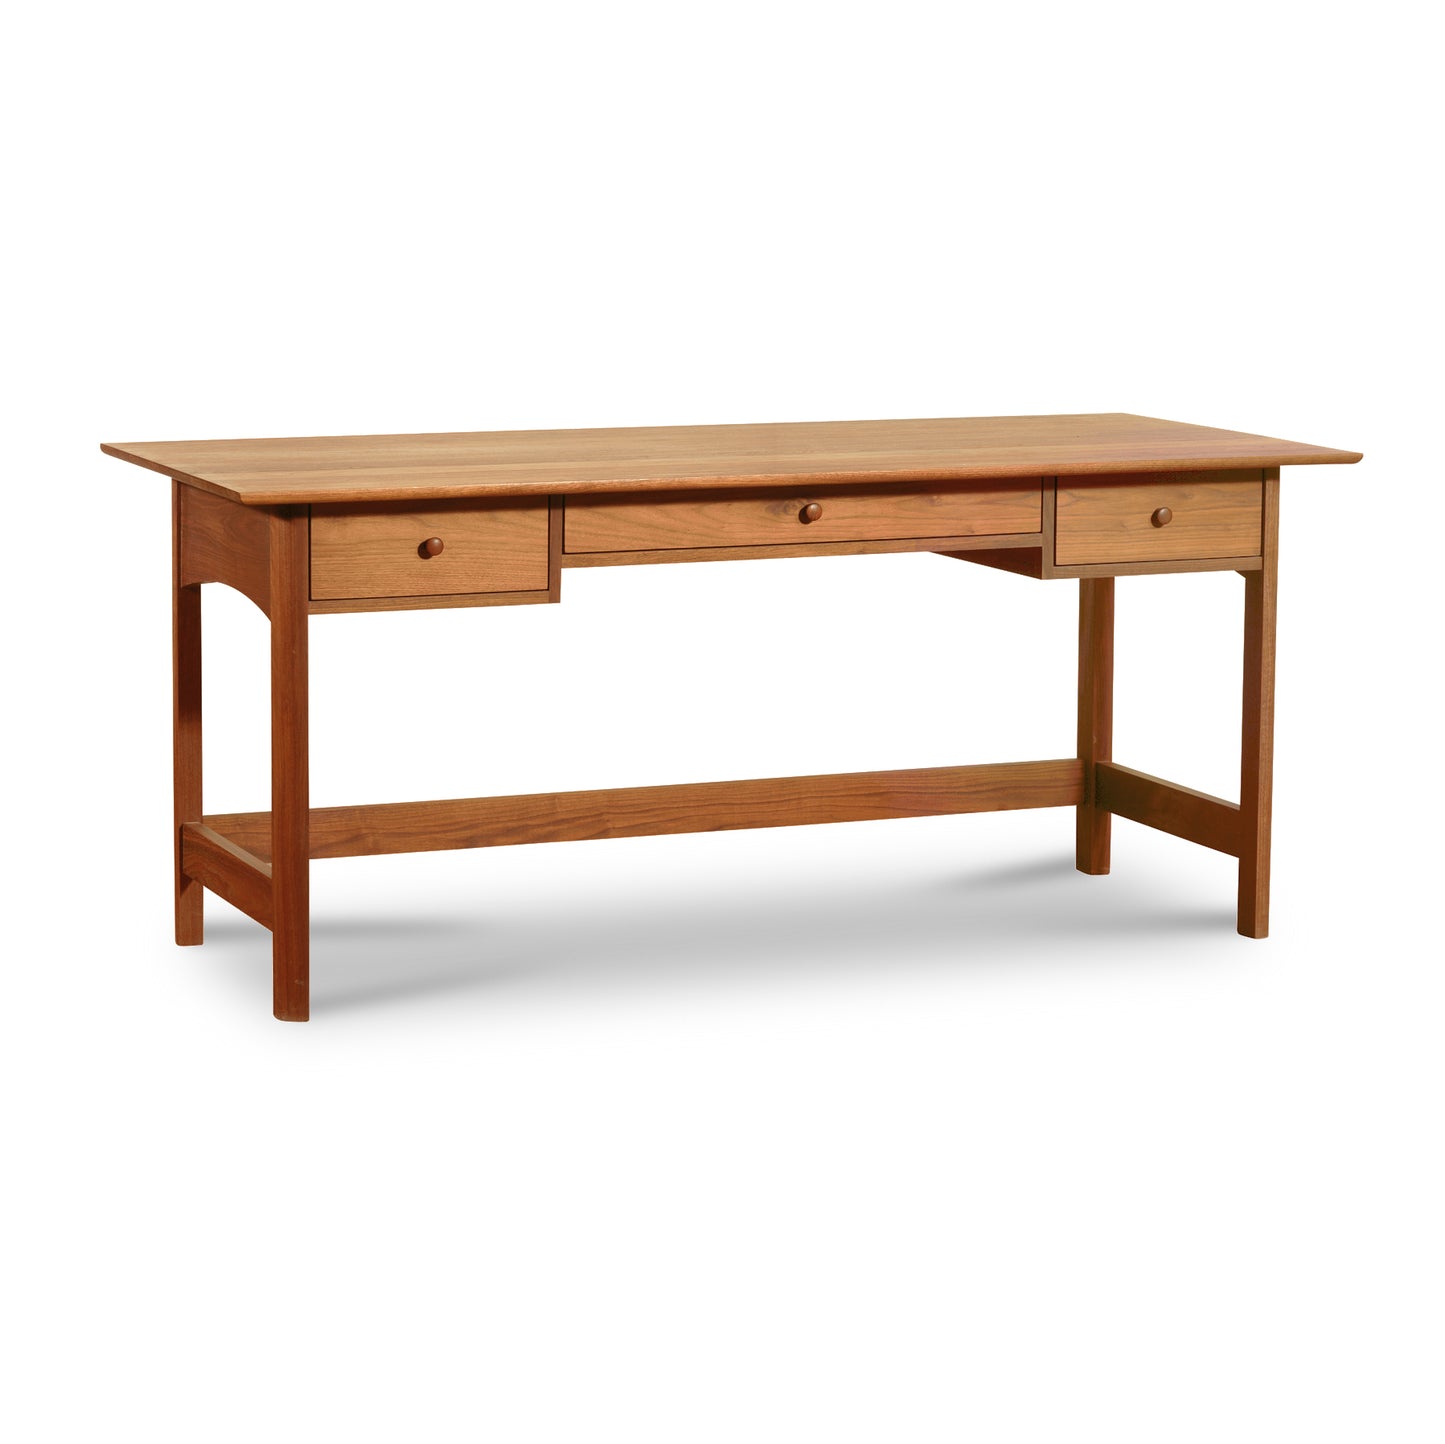 Handmade in Vermont, the Vermont Furniture Designs Heartwood Shaker Campaign Desk features solid wood construction with two drawers on a white background.